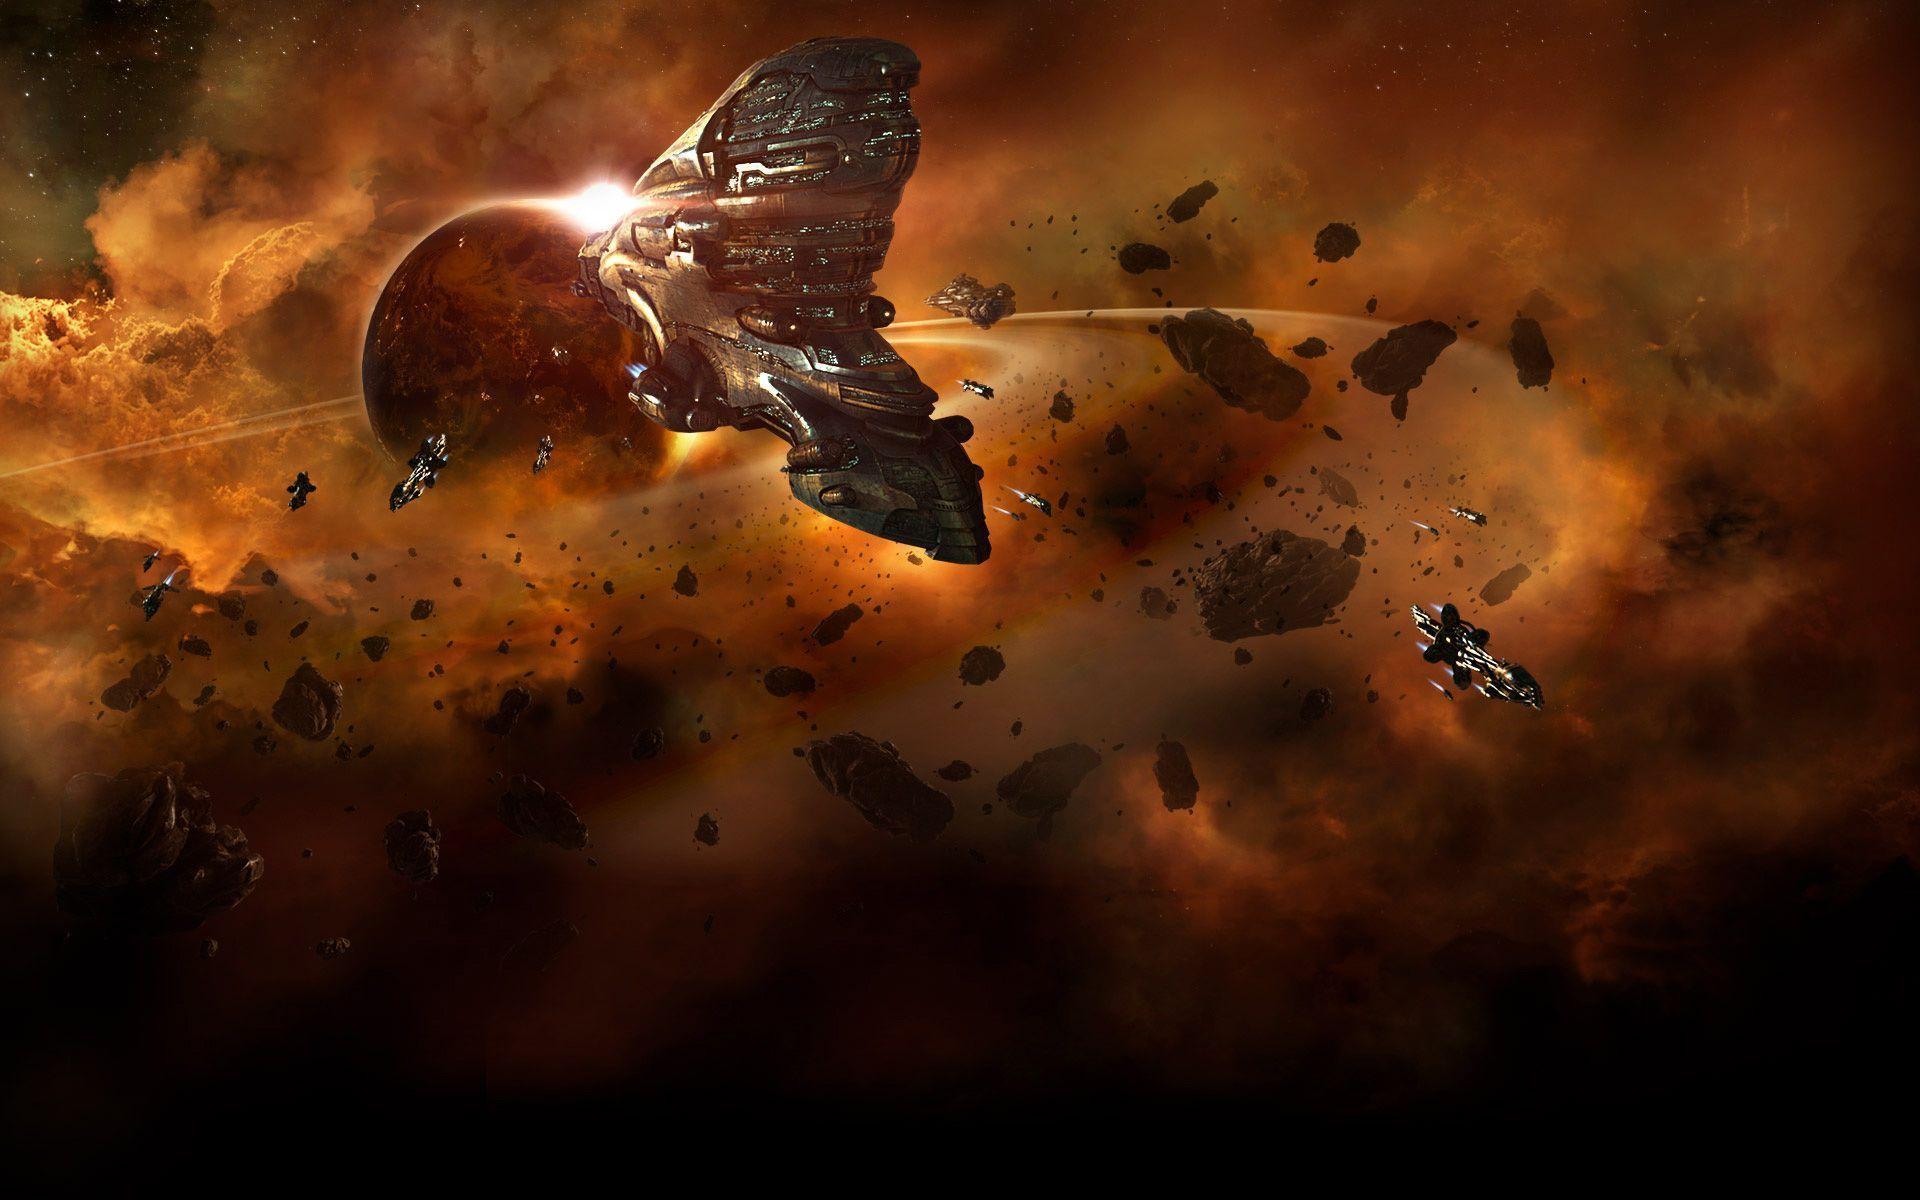 Wallpaper background official eve online game 1920x1200 px